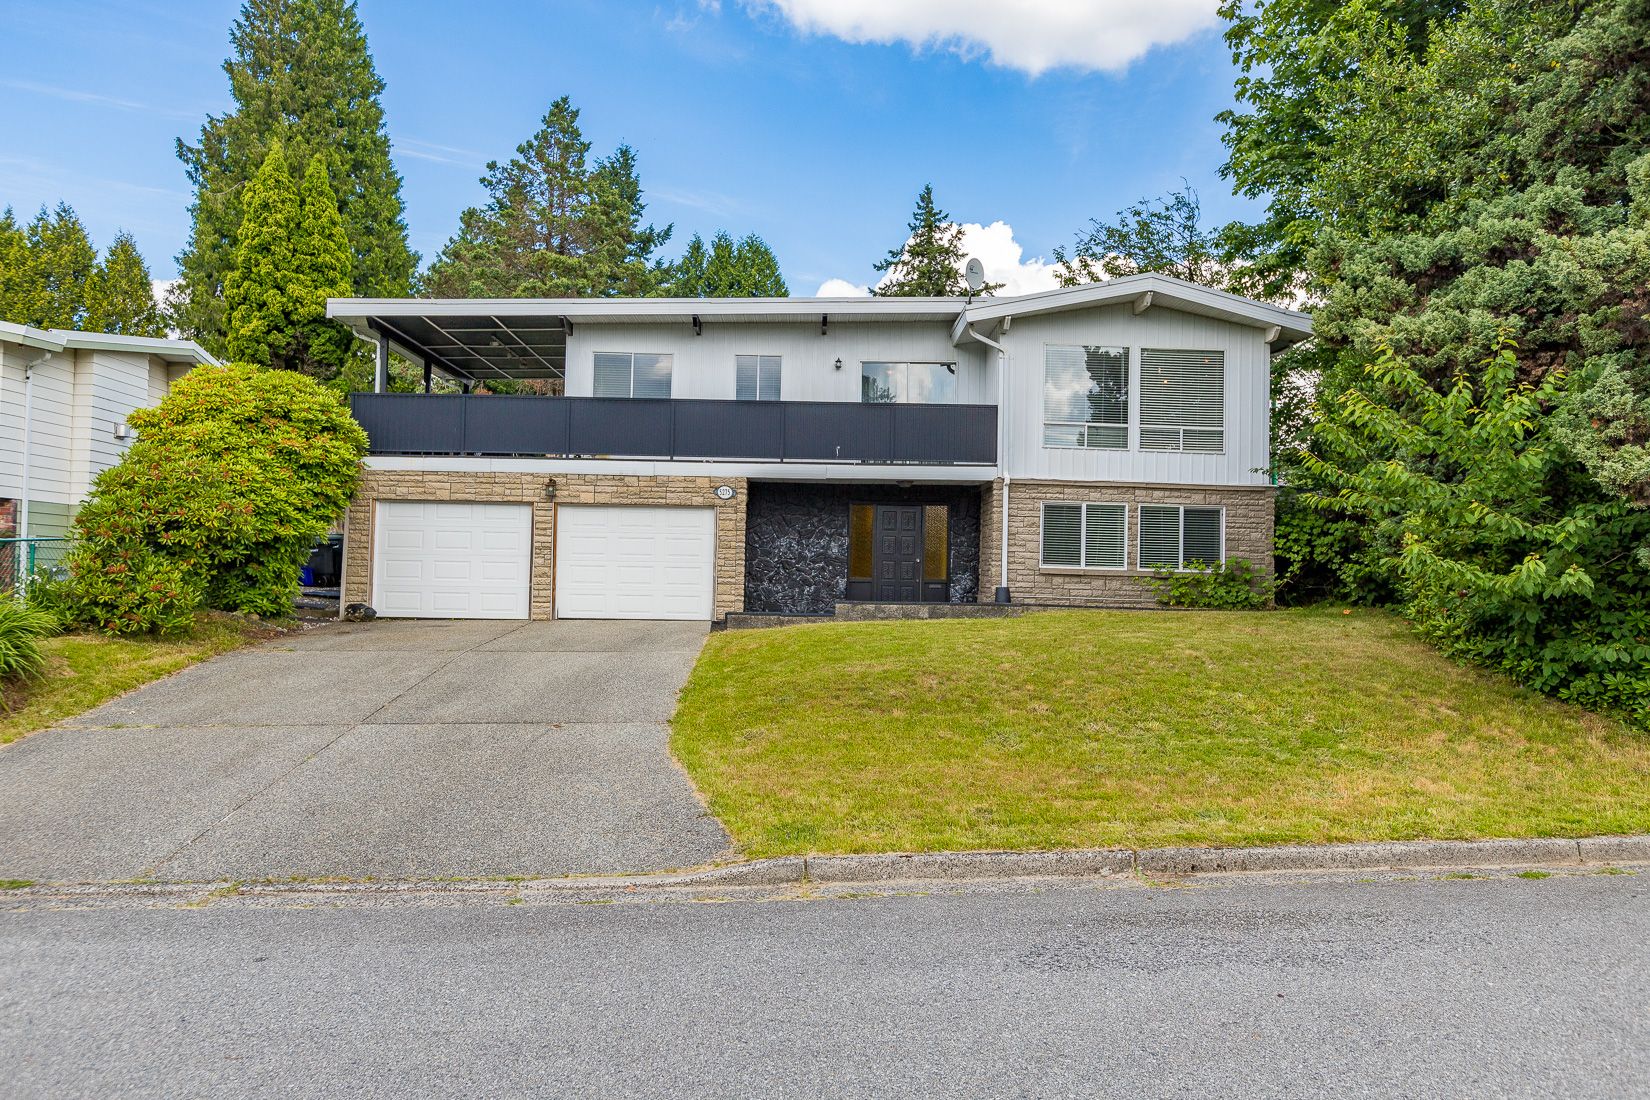 Photo 1: Photos: SPRINGDALE CT in BURNABY: Parkcrest House for sale (Burnaby North)  : MLS®# R2591718